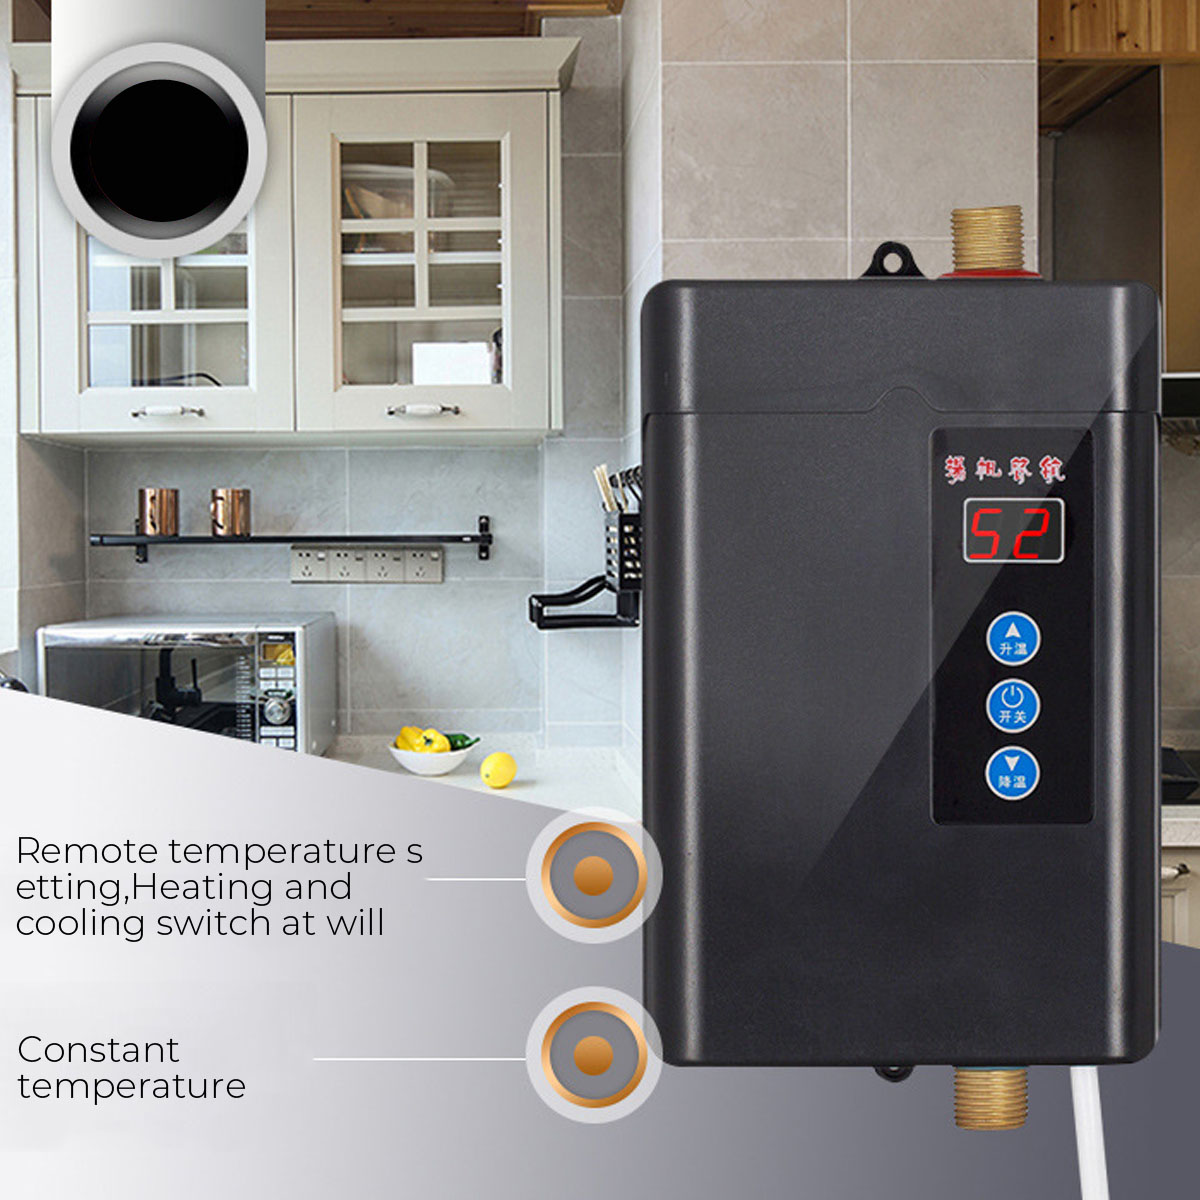 Electric-Water-Heater-Instant-Hot-Tankless-Under-Sink-Tap-BathroomKitchen-1803717-3